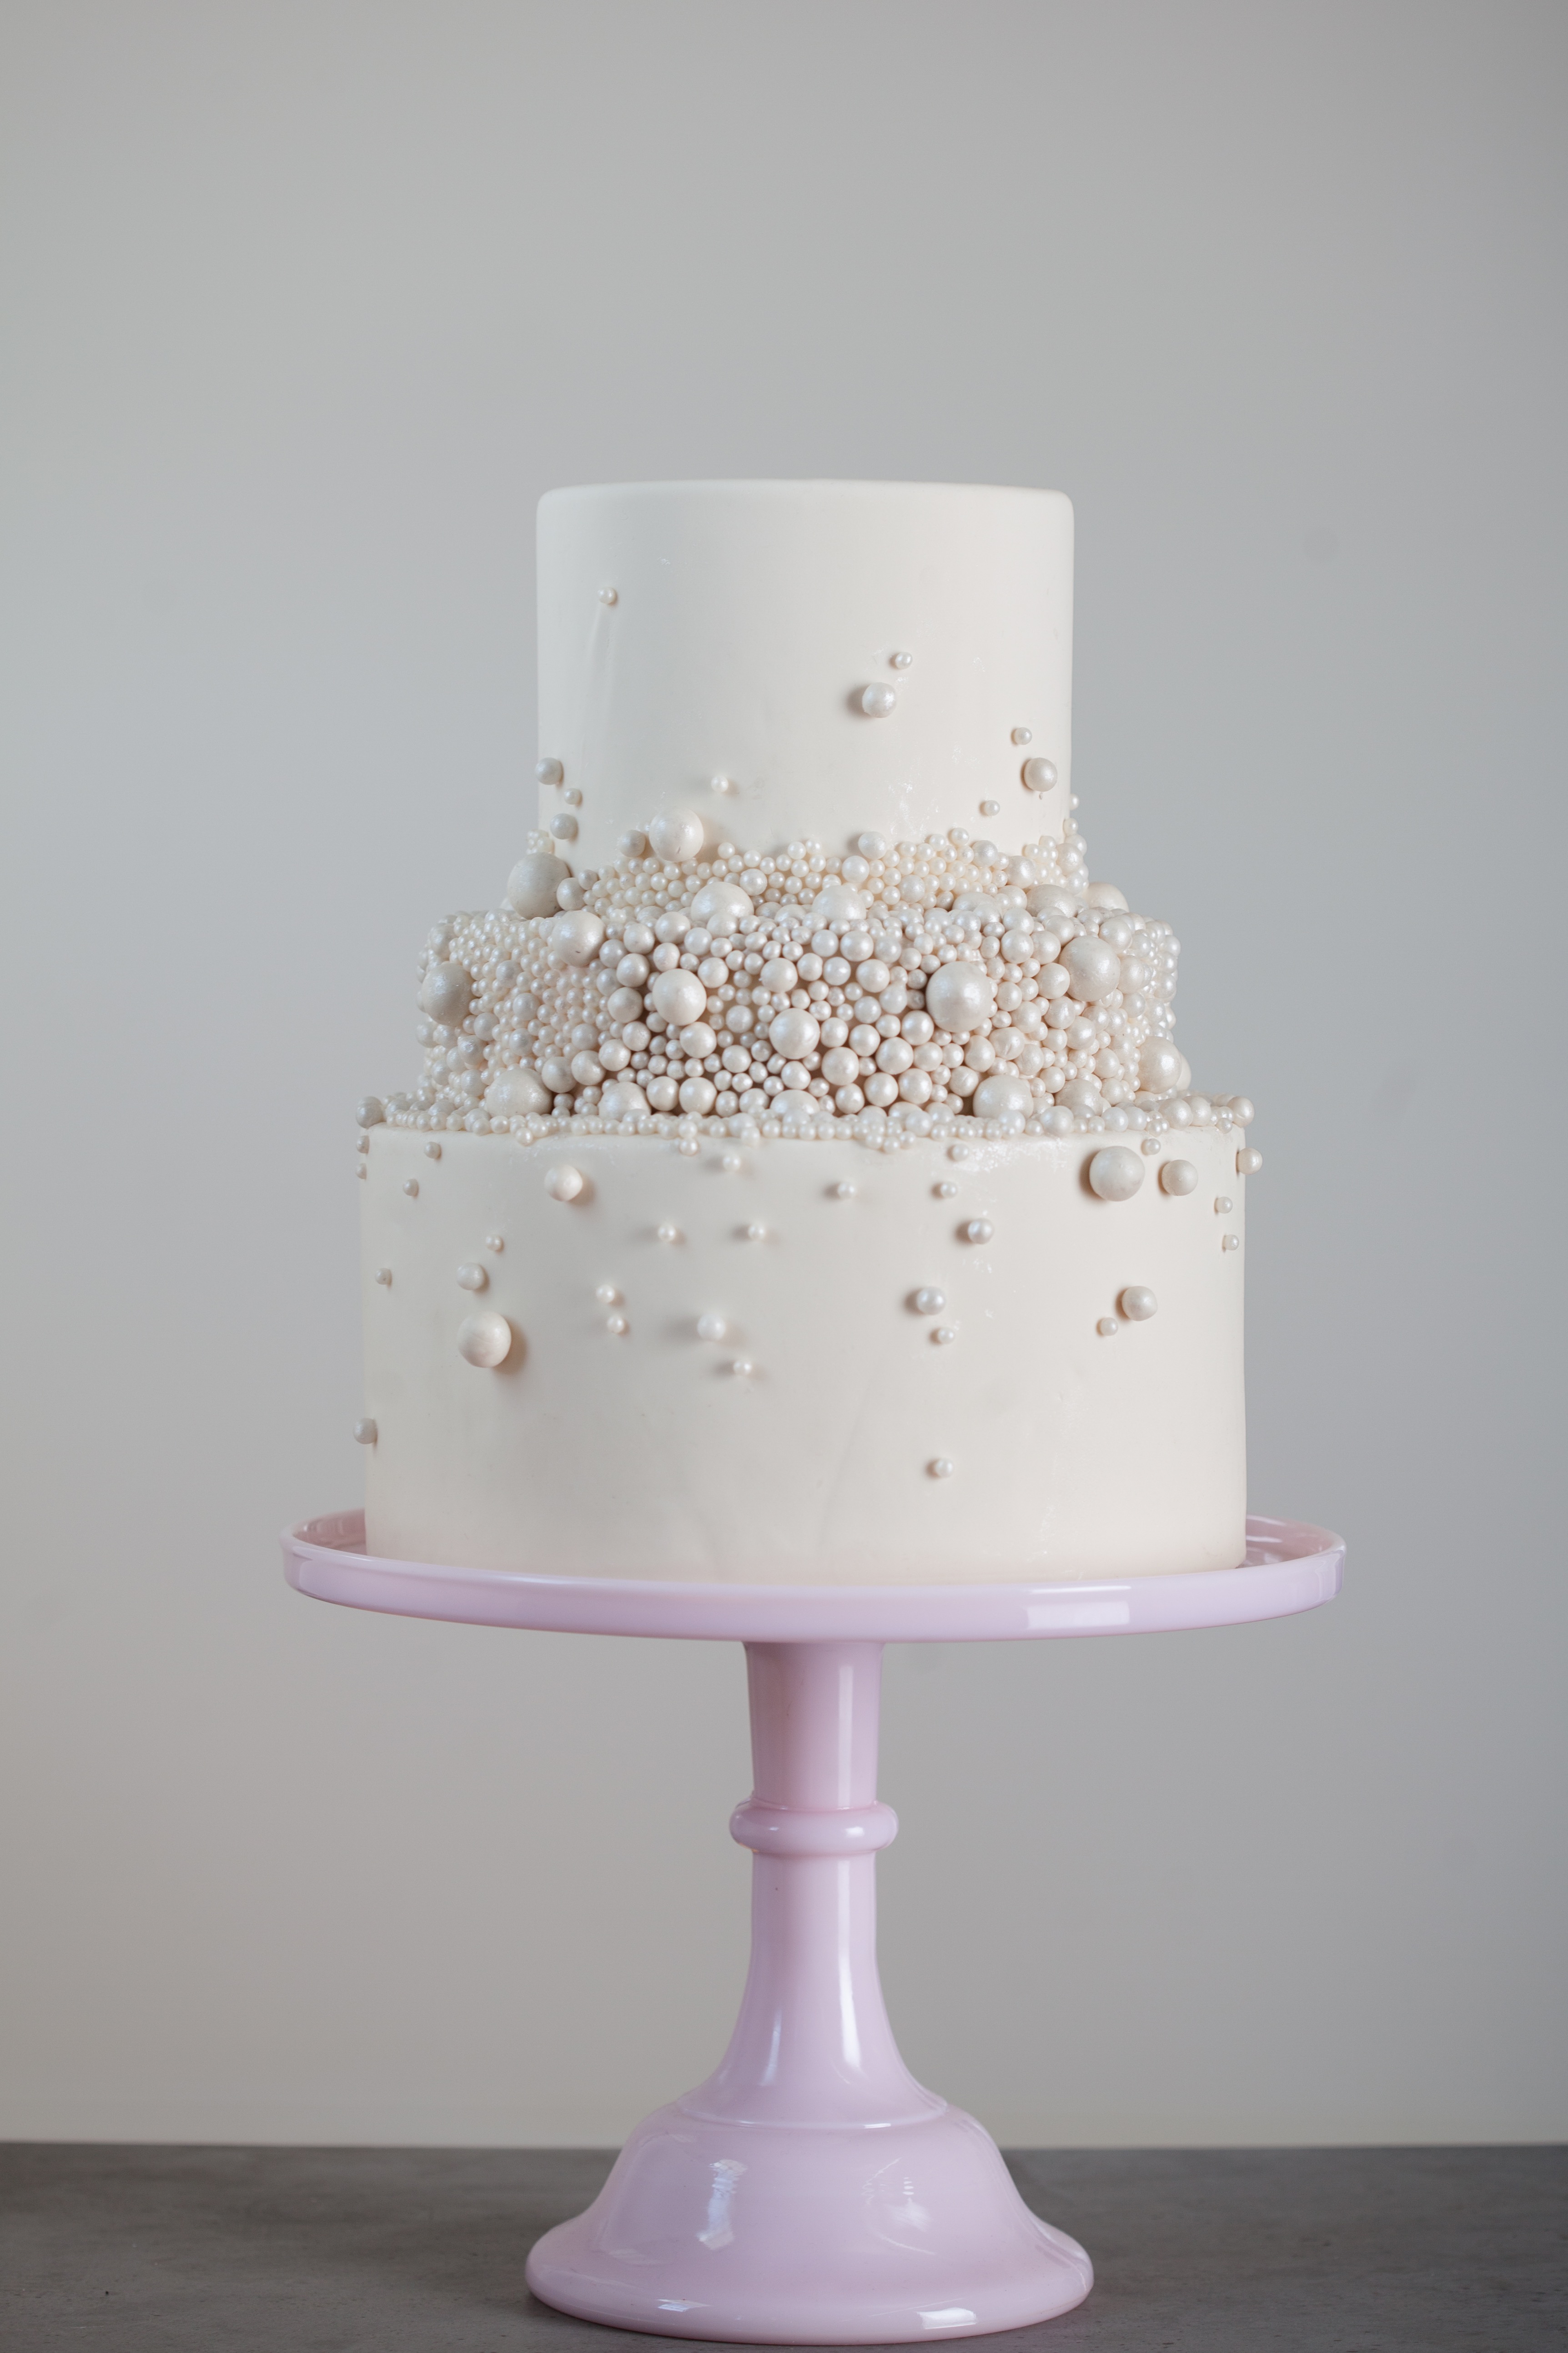 Using Edible Glue to Attach Pearls to a Cake